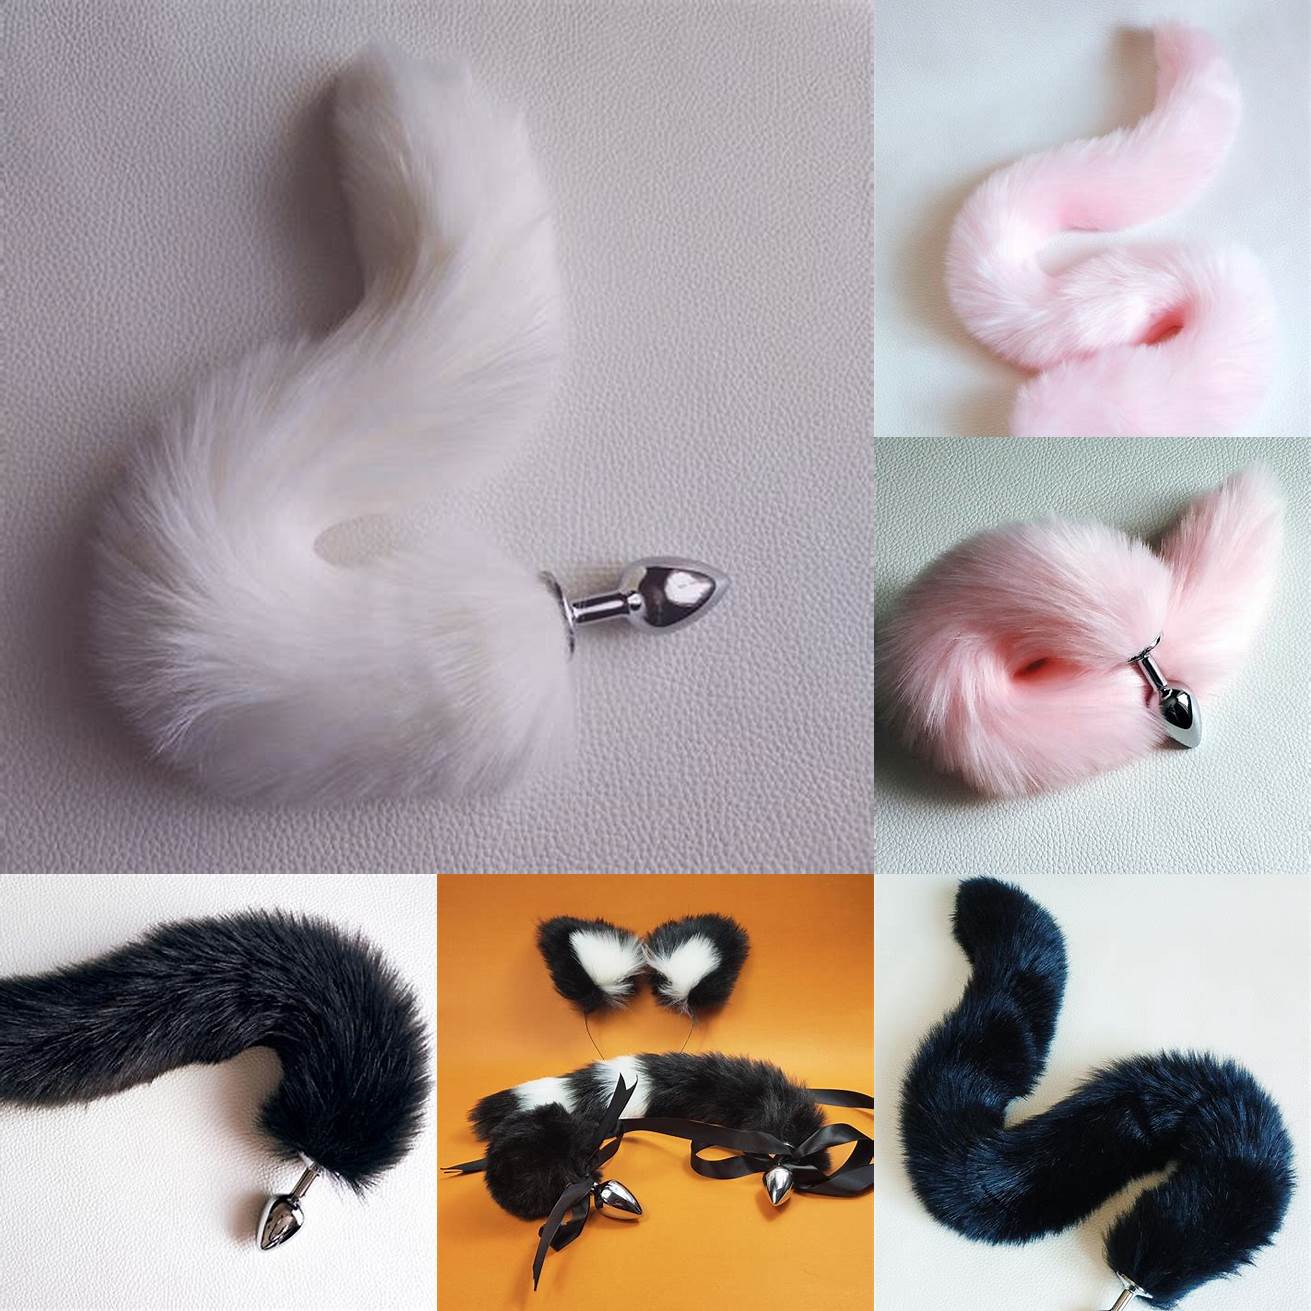 Image Idea 5 Using Butt Plug Cat Tail for BDSM Play